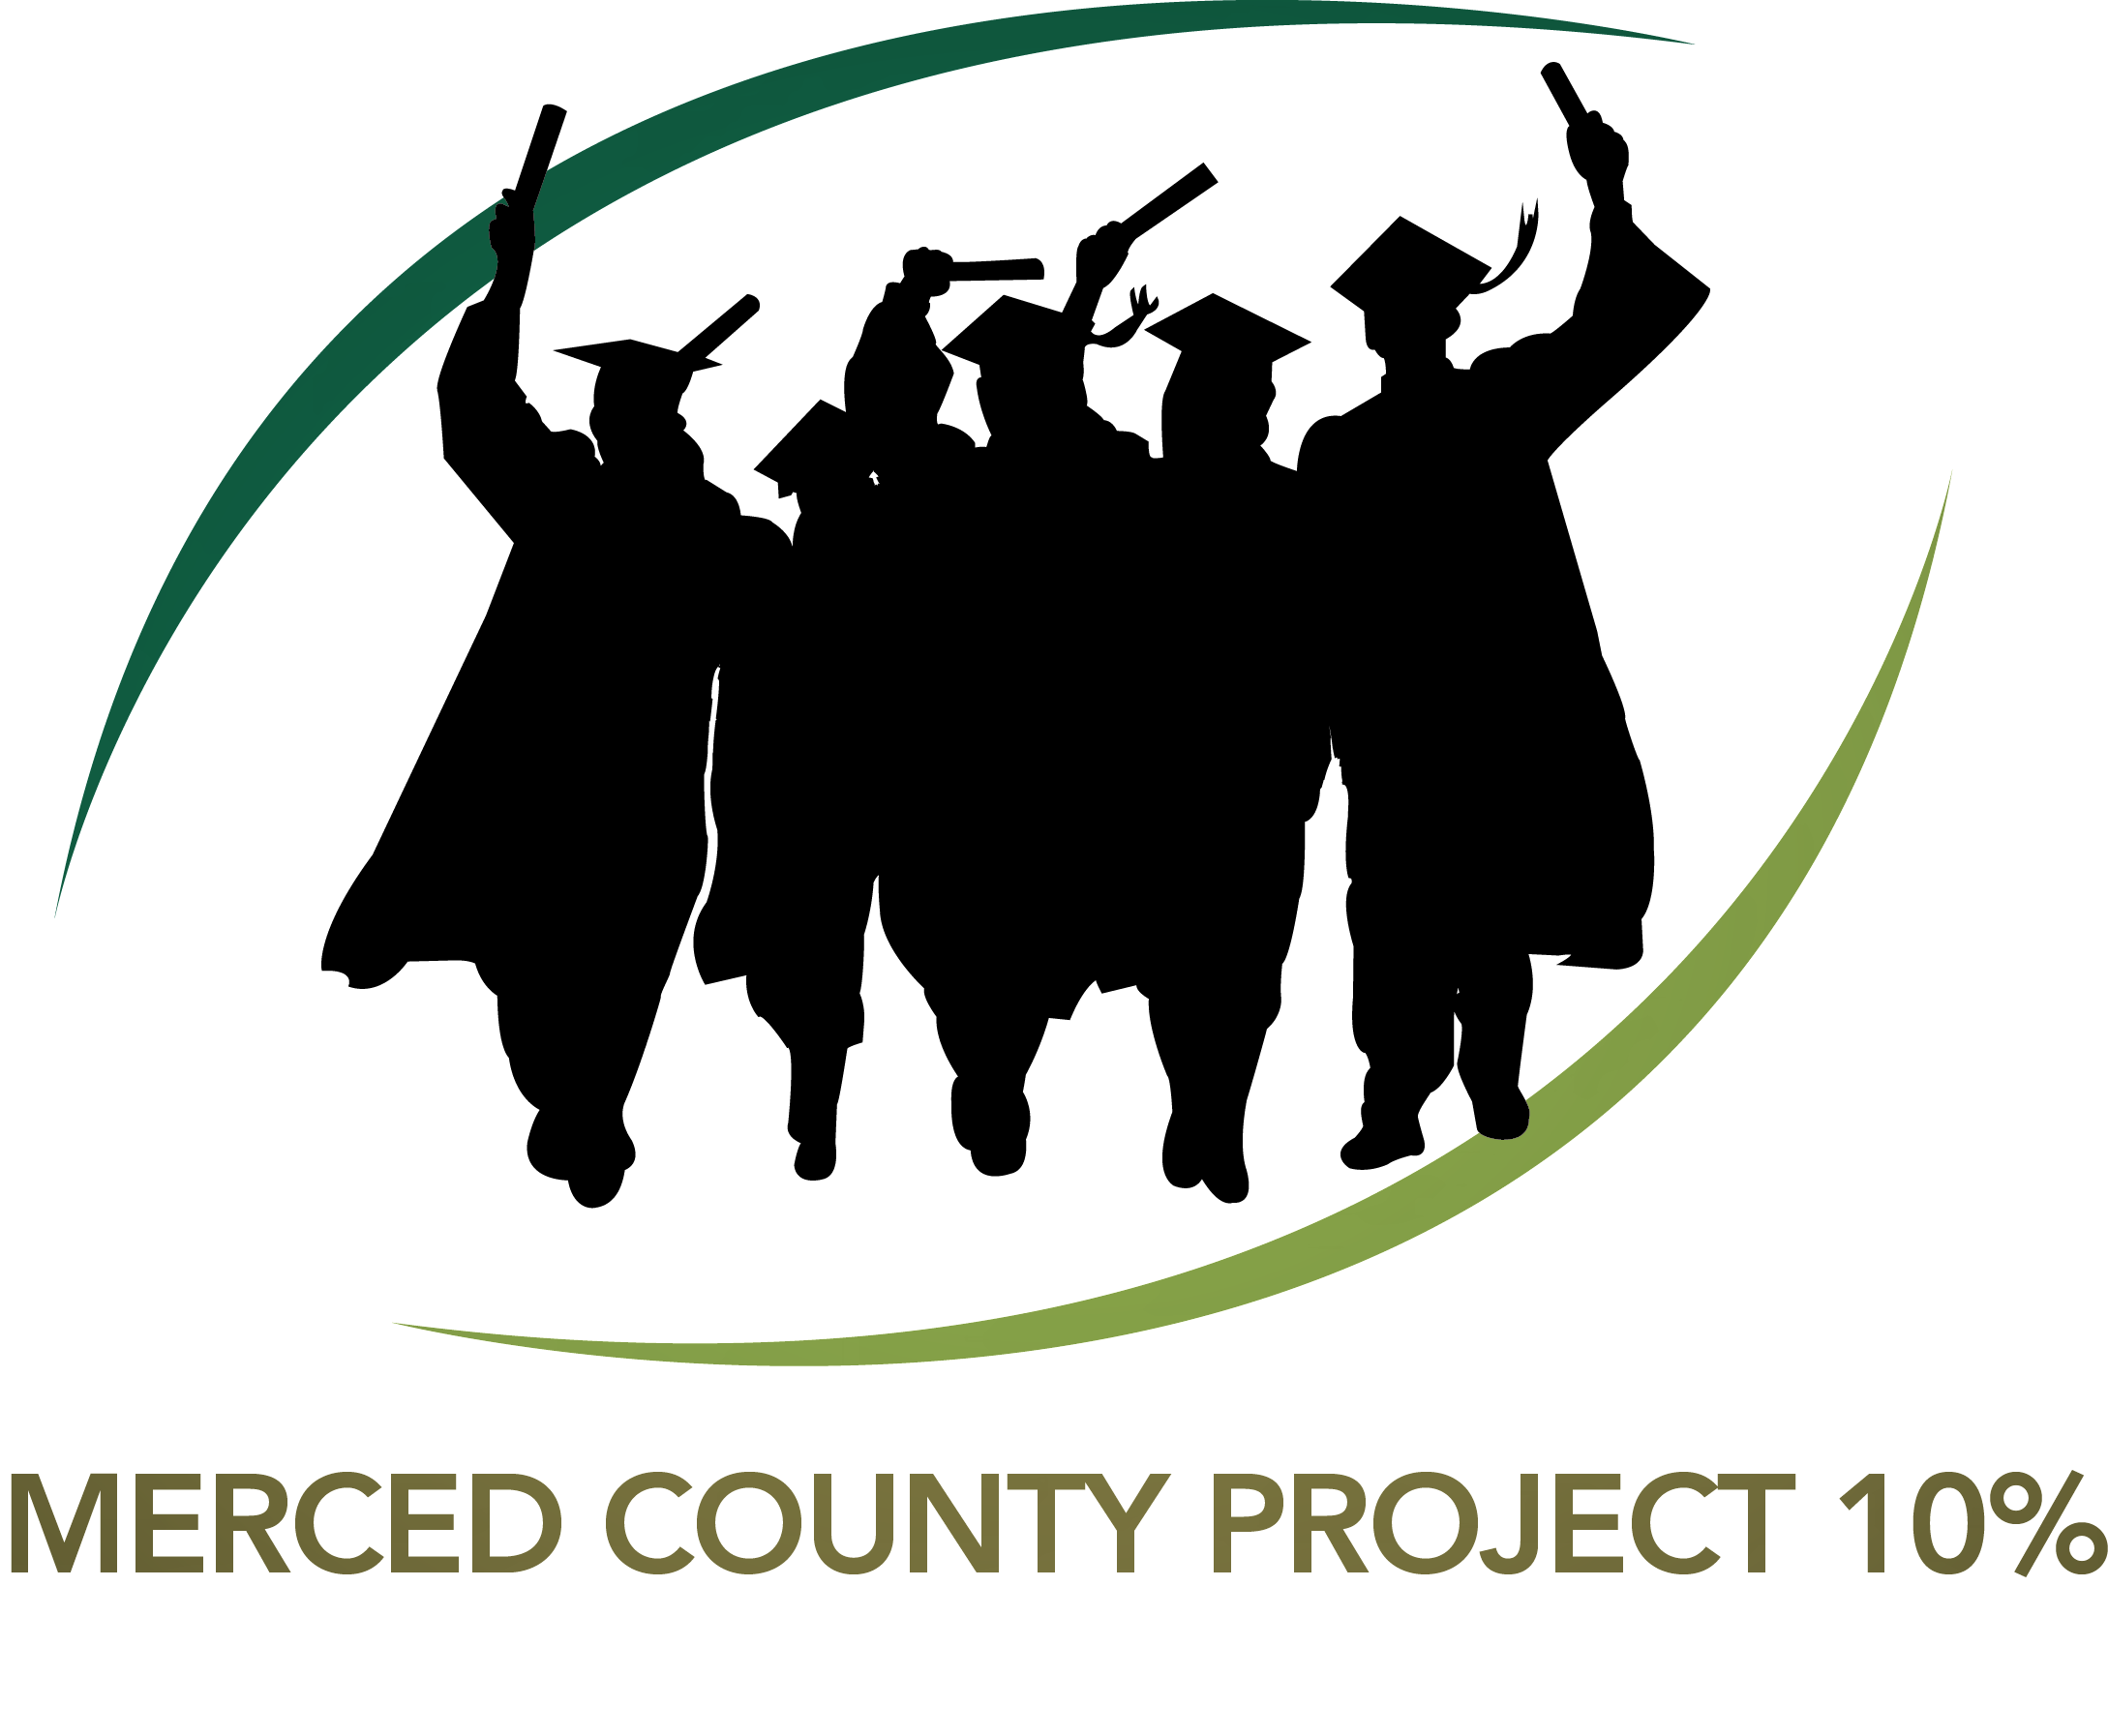 Merced County Project 10%